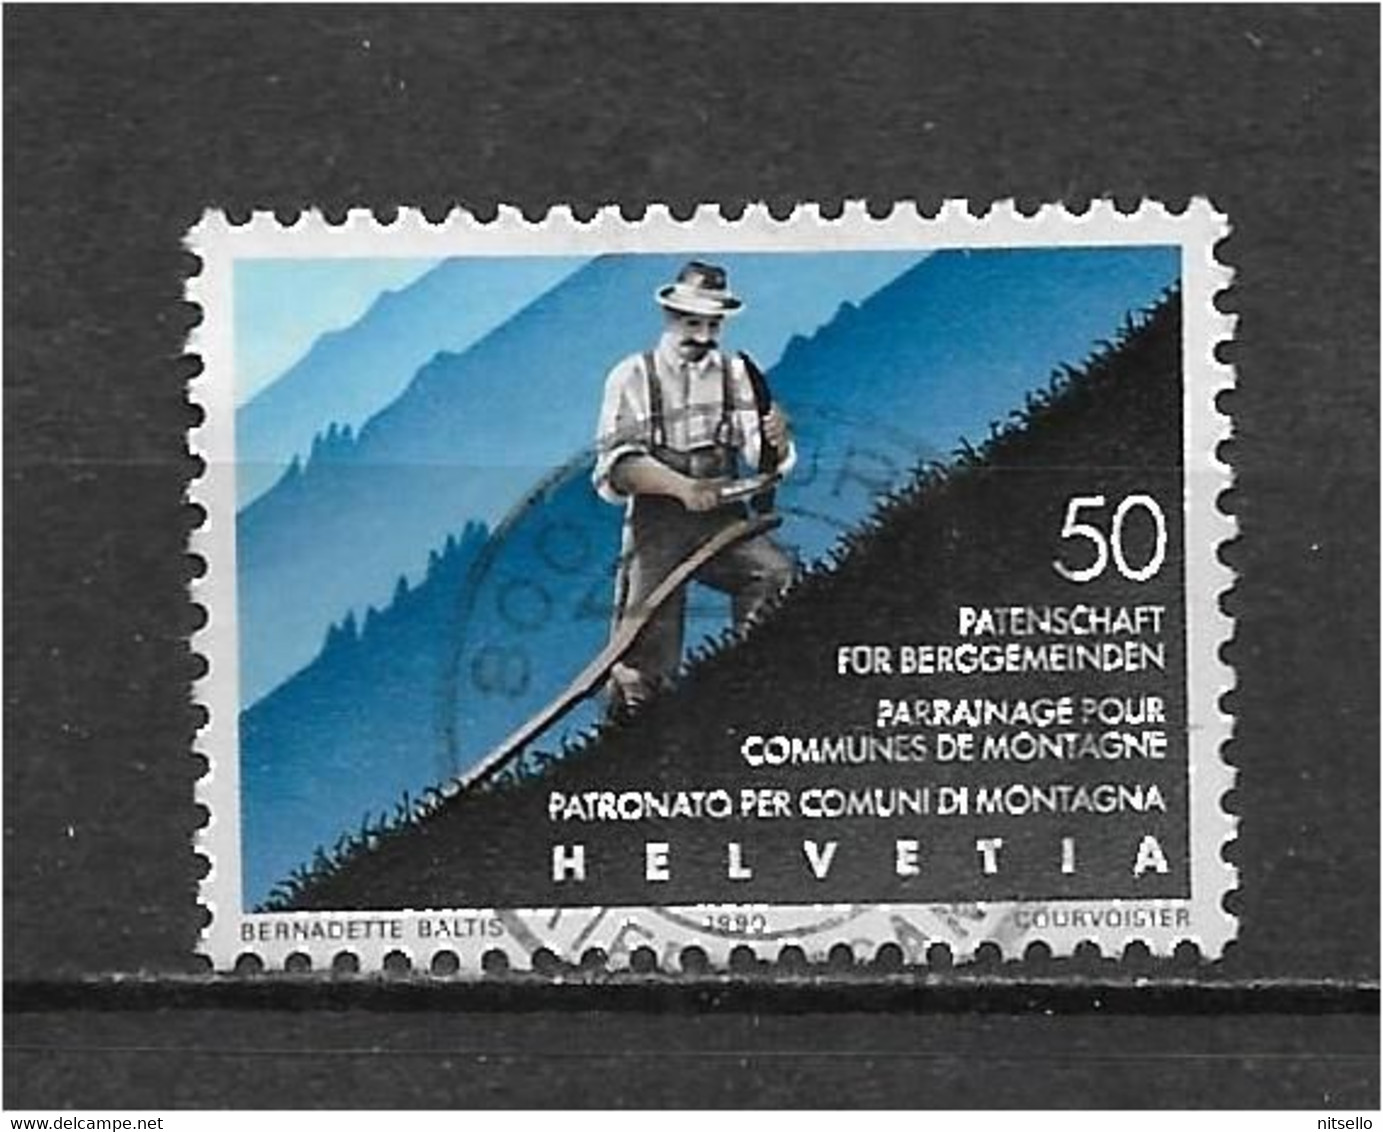 LOTE 1530A /// SUIZA YVERT Nº: 1340  ¡¡¡ OFERTA - LIQUIDATION - JE LIQUIDE !!! - Used Stamps